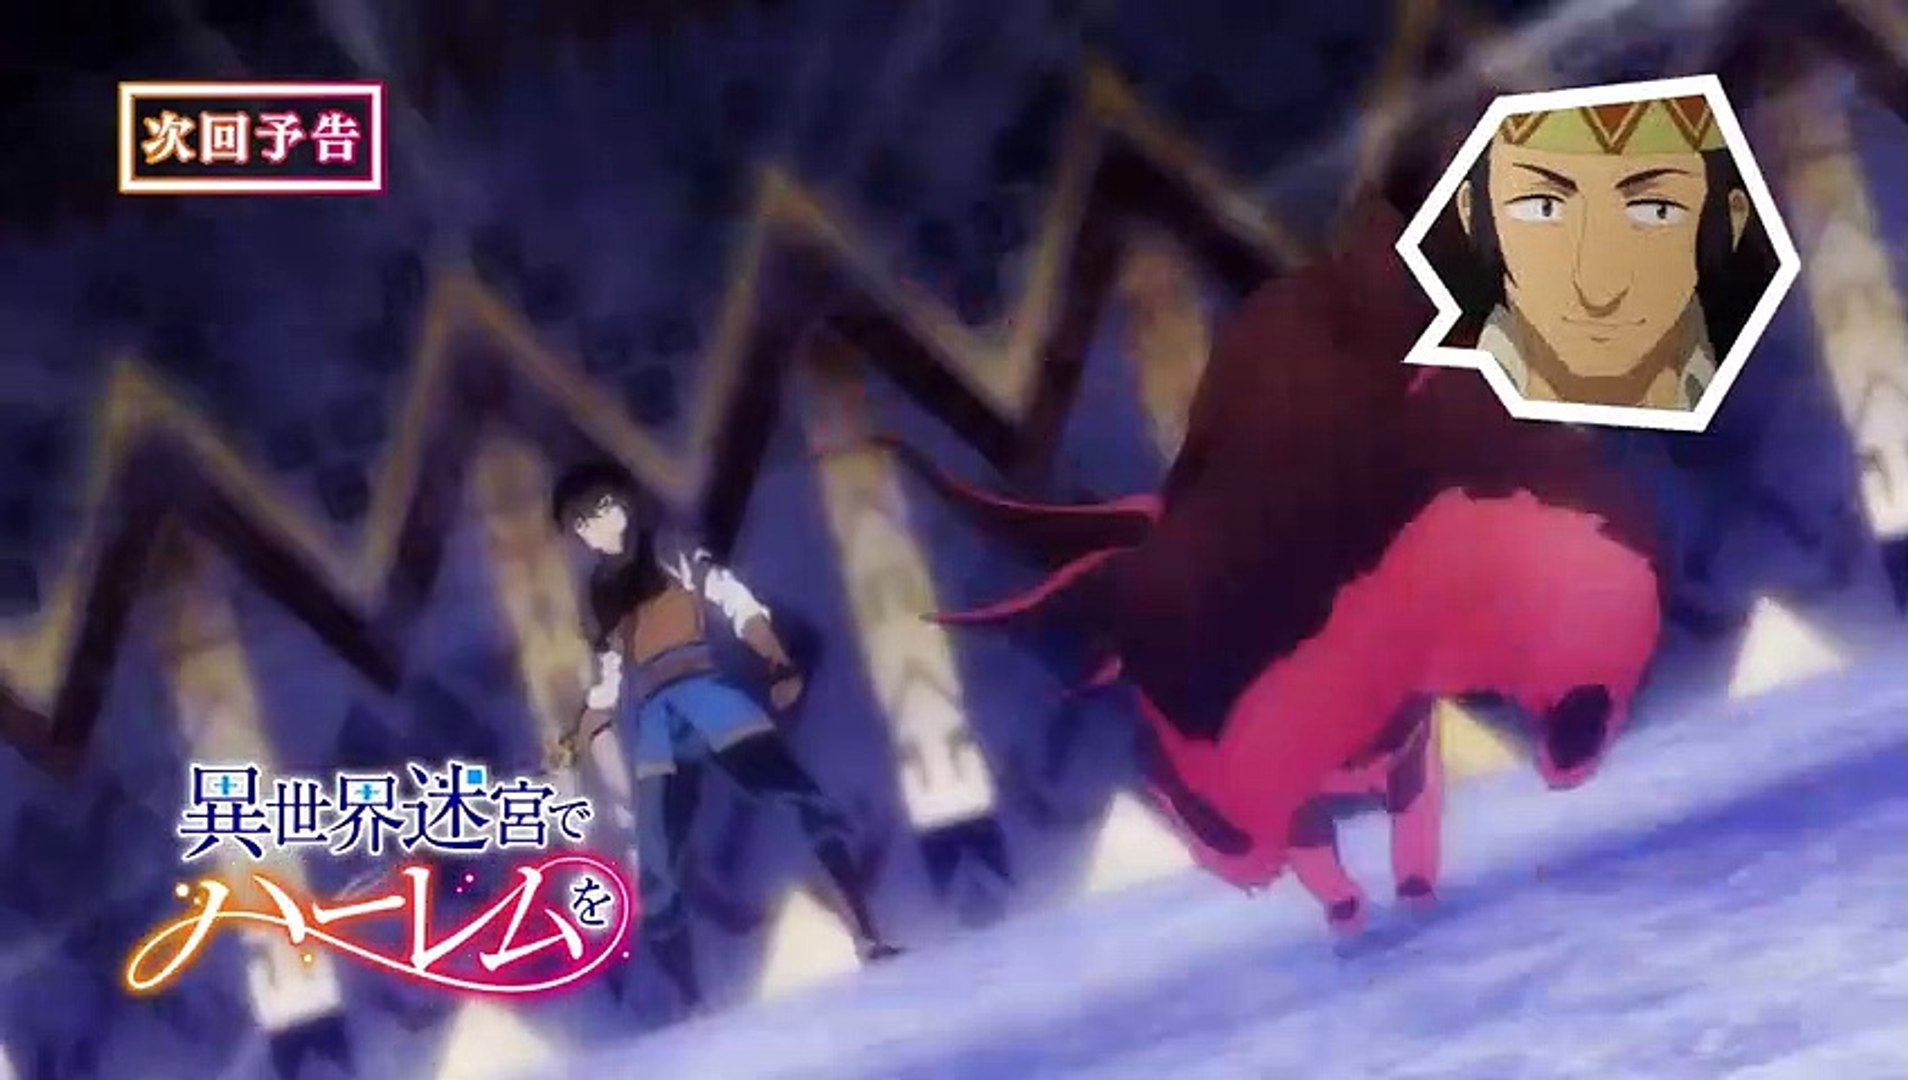 Harem in the Labyrinth of Another World Episode 12 Preview Trailer